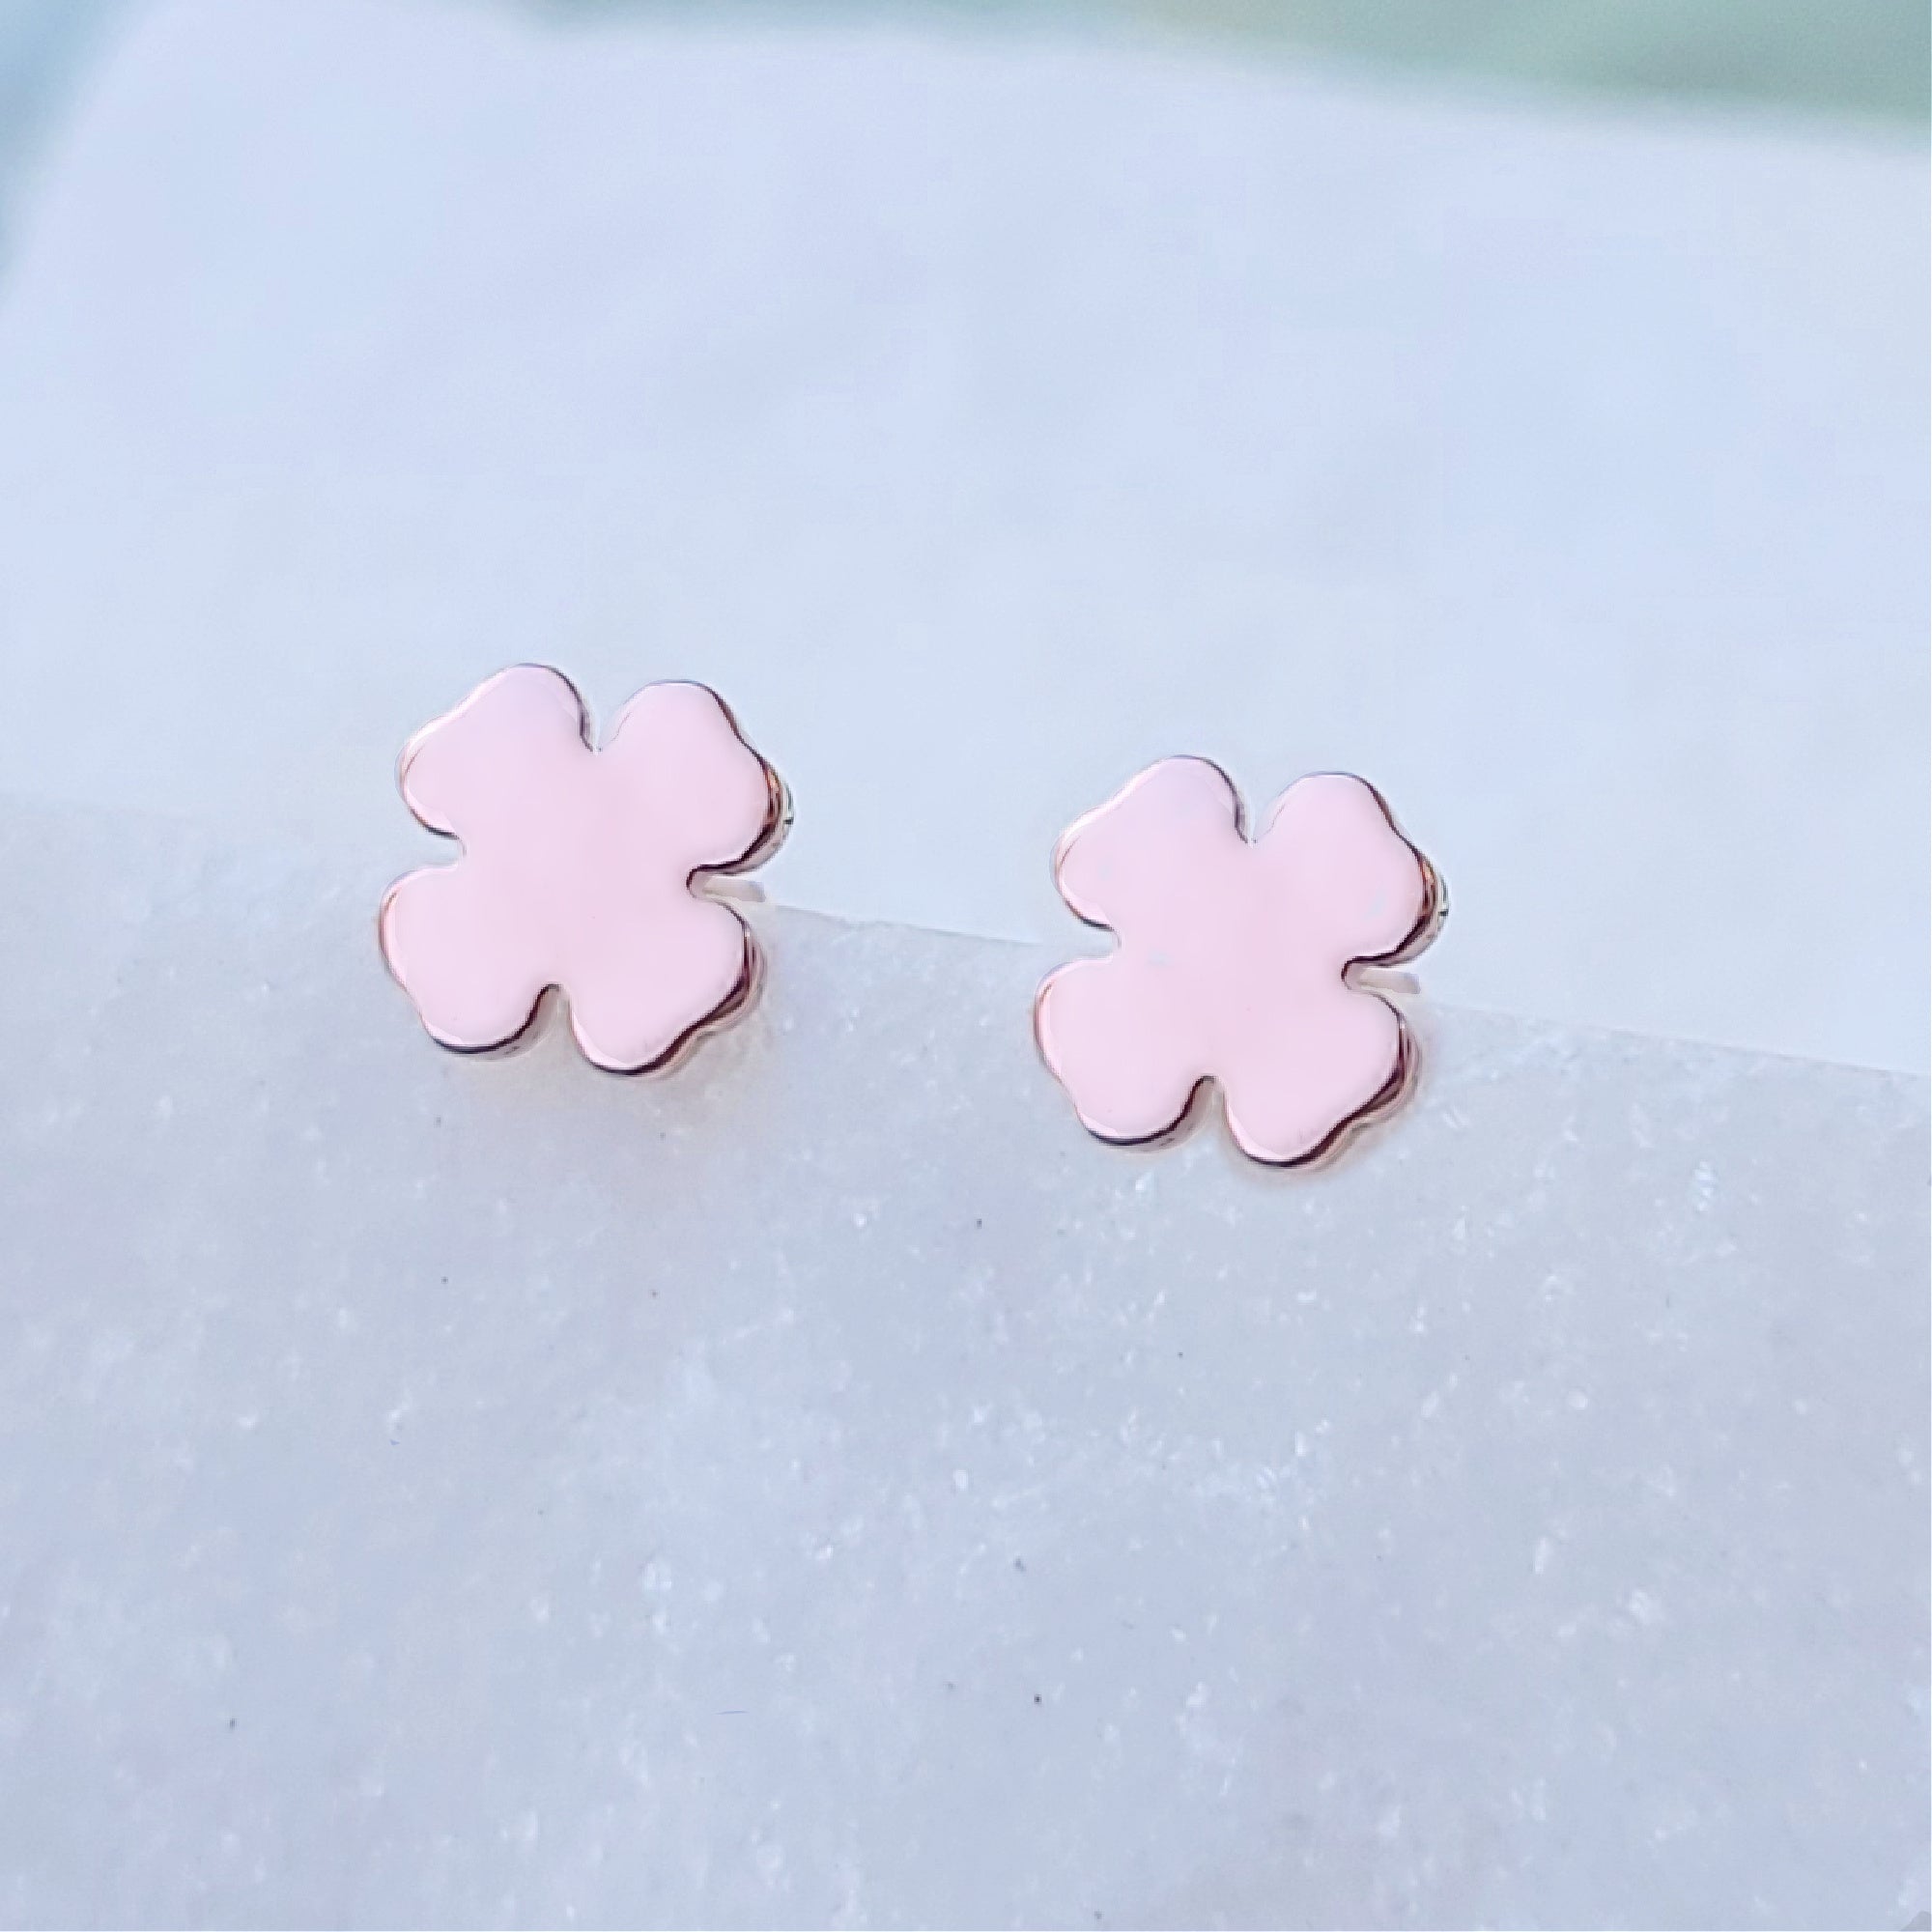 Image of 14K Minimalistic Clover Stud Earrings in Rose Gold